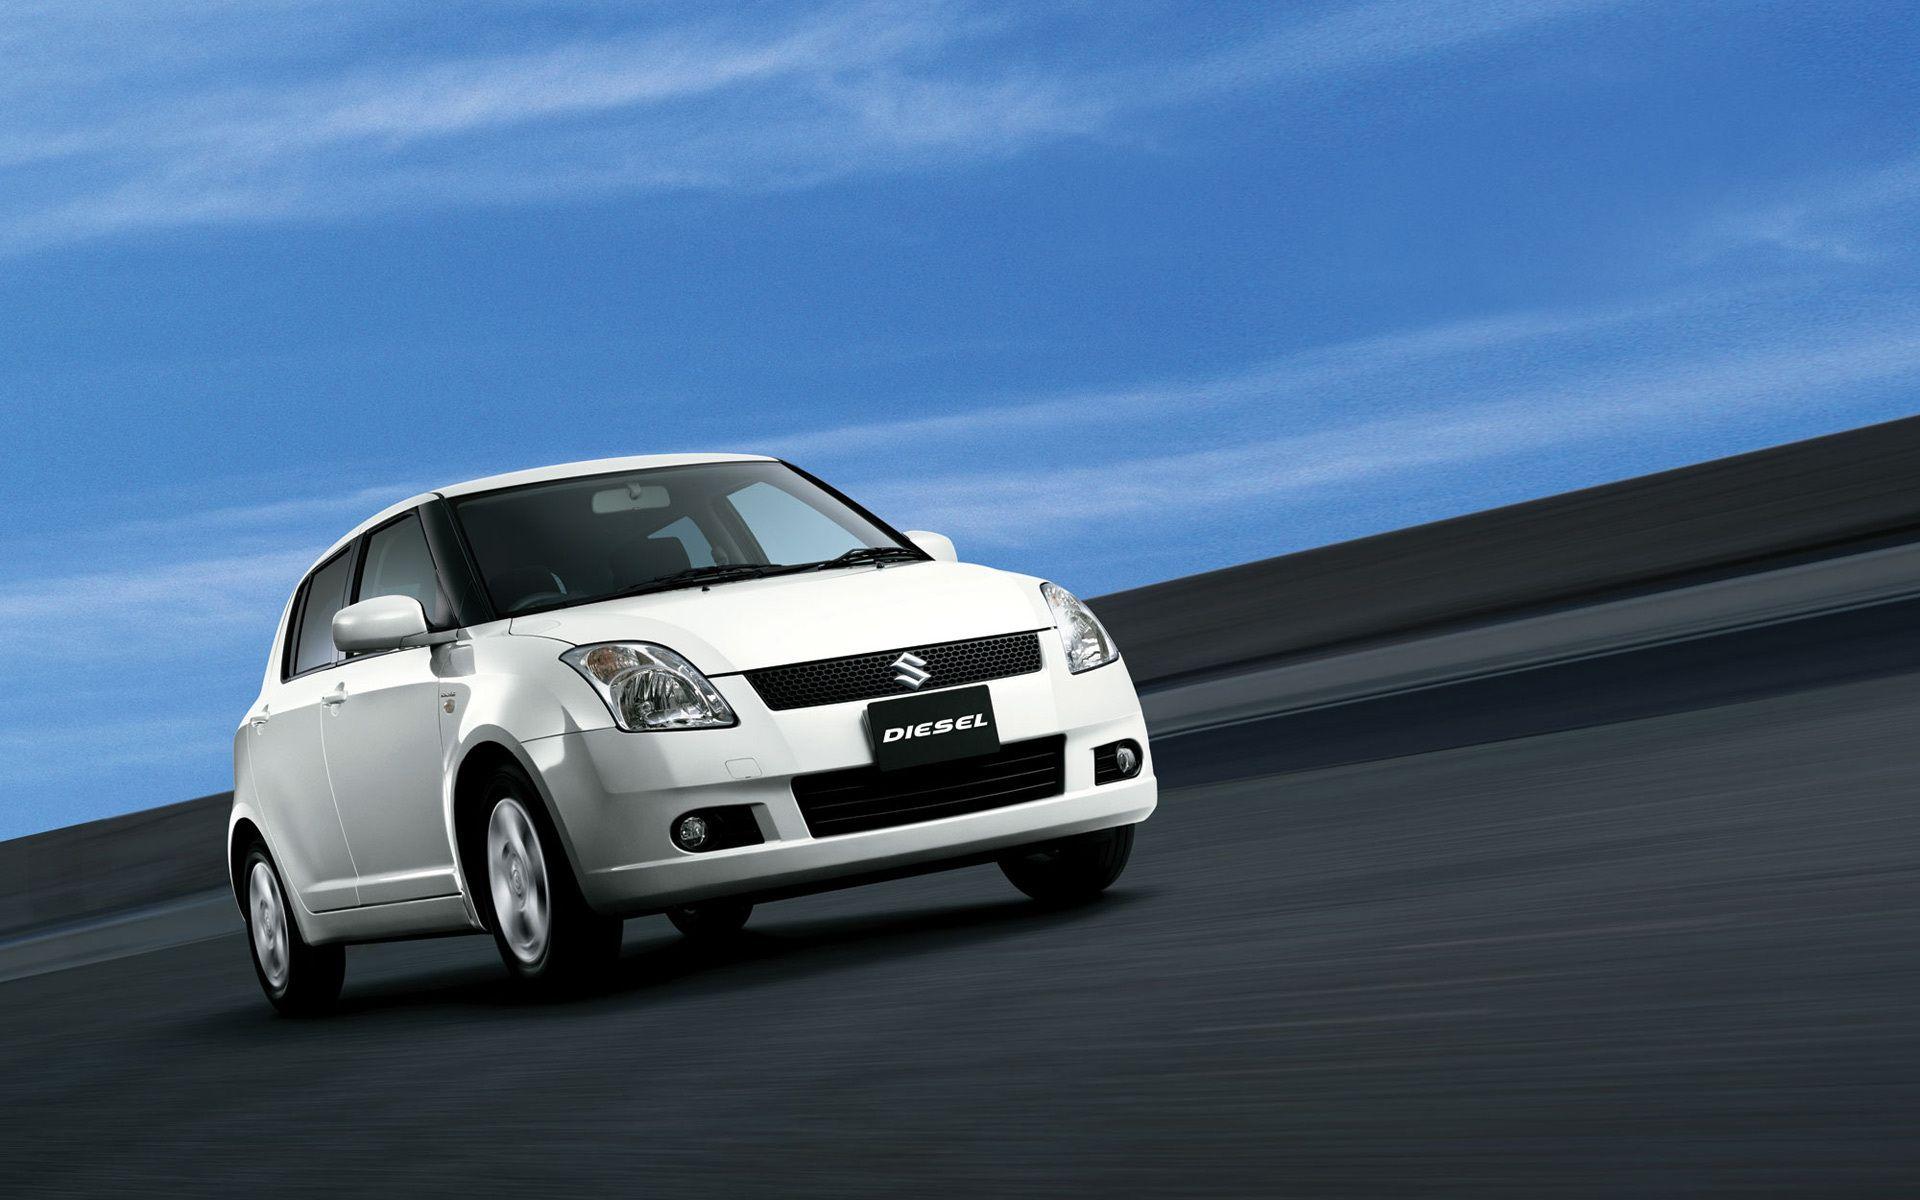 photos of the car Suzuki Swift wallpaper and image